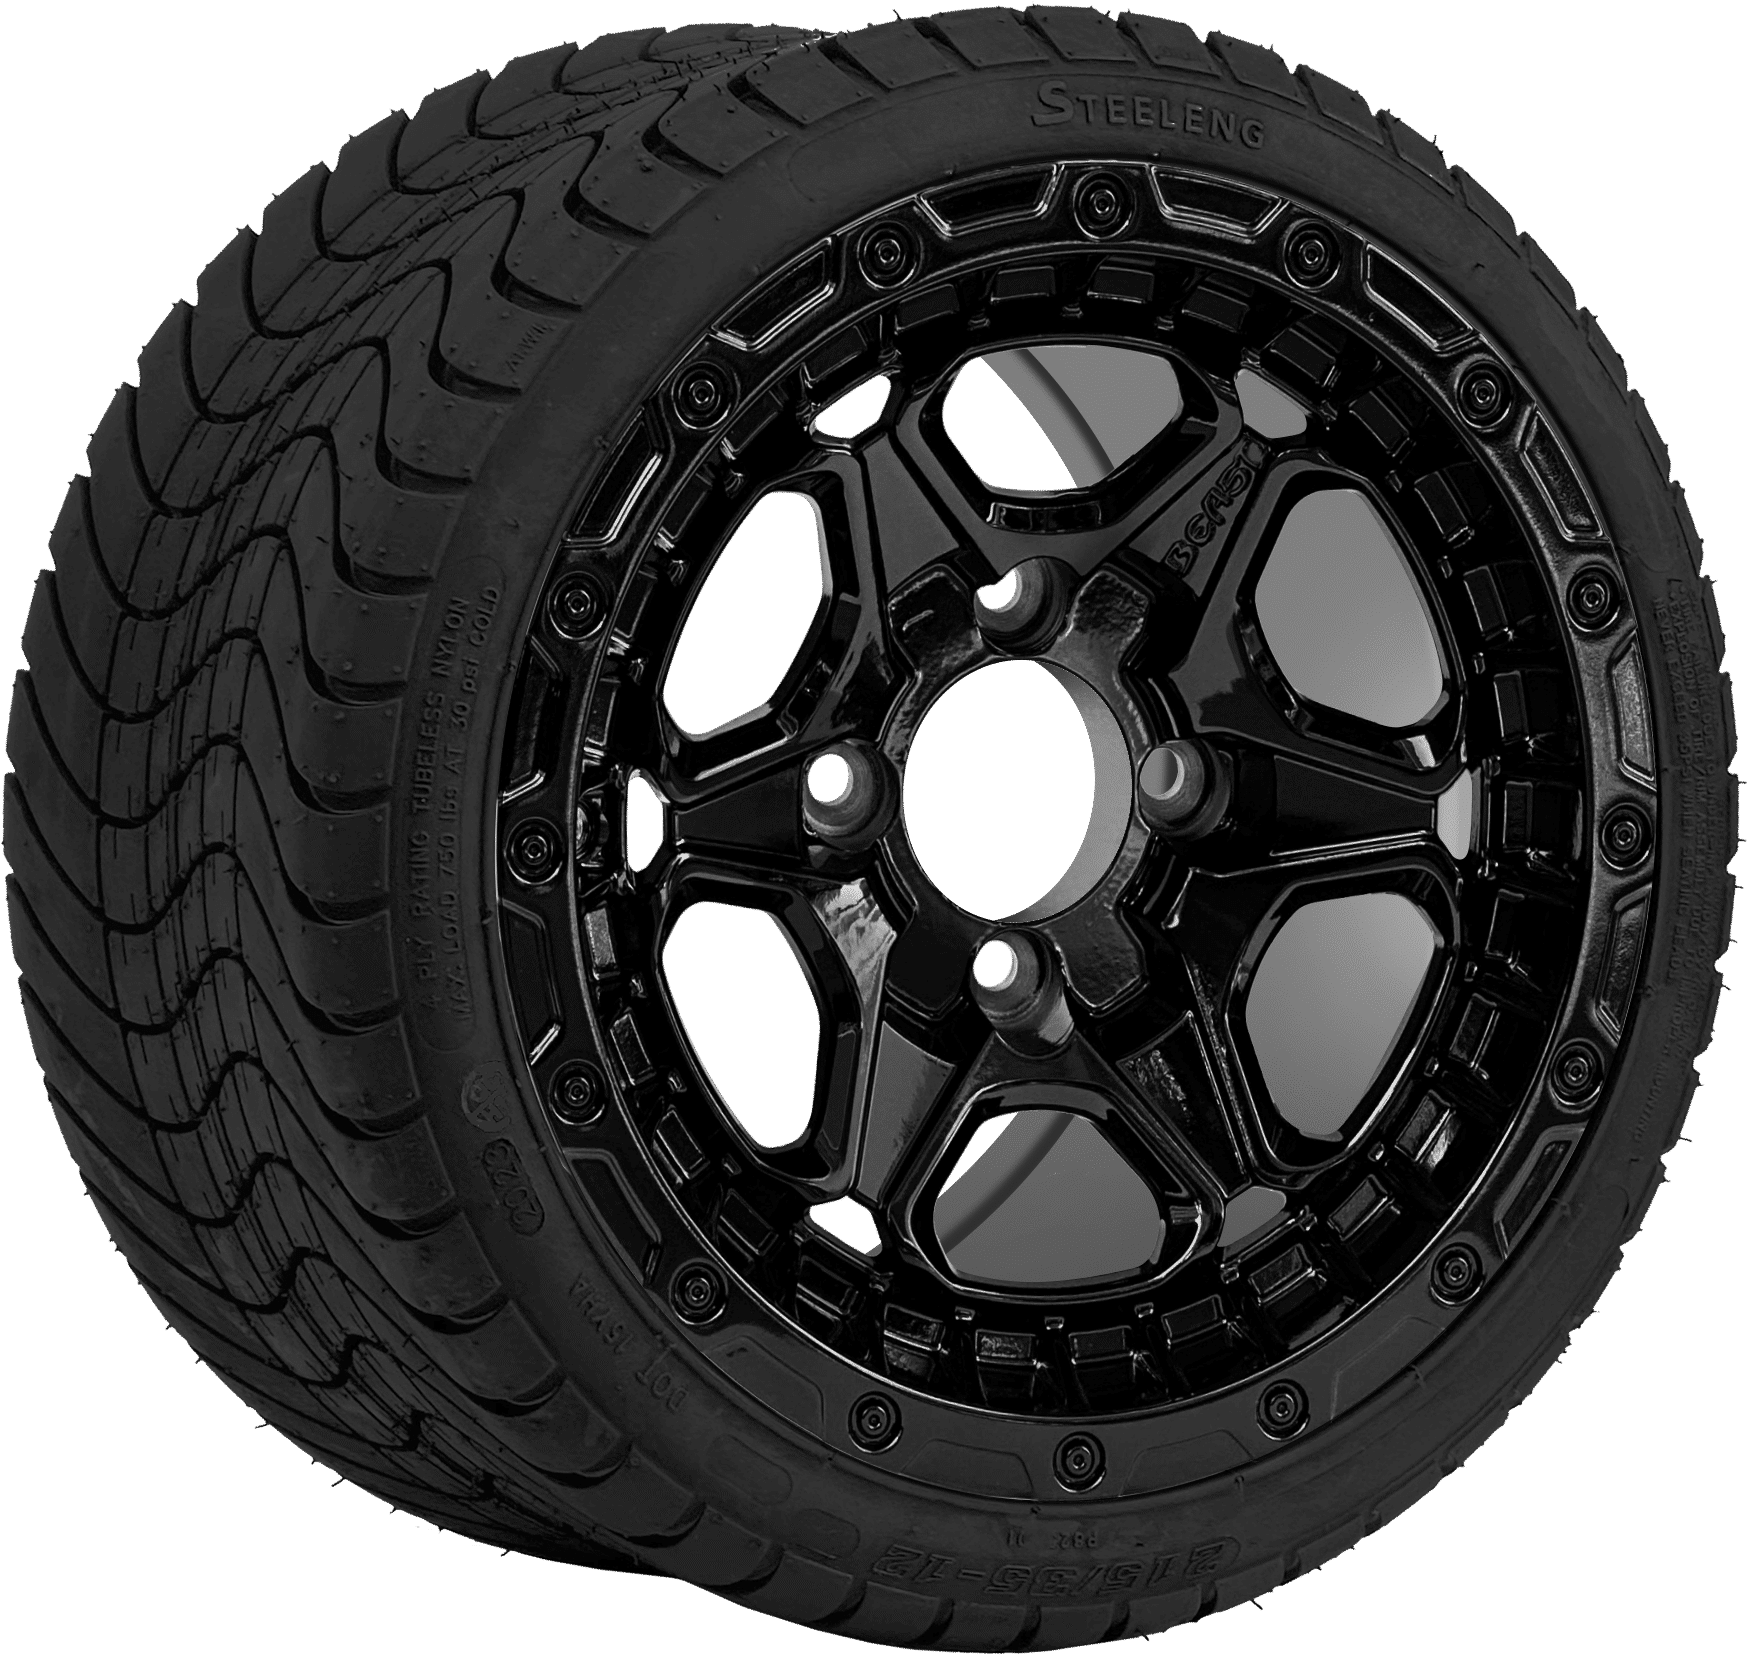 BNDL-TR1211-WH1264-CC0027-LN0005 12″ GRIZZLY GLOSSY BLACK WHEEL – ALUMINUM ALLOY / STEELENG 215/40-12 LOW PROFILE TIRE DOT APPROVED